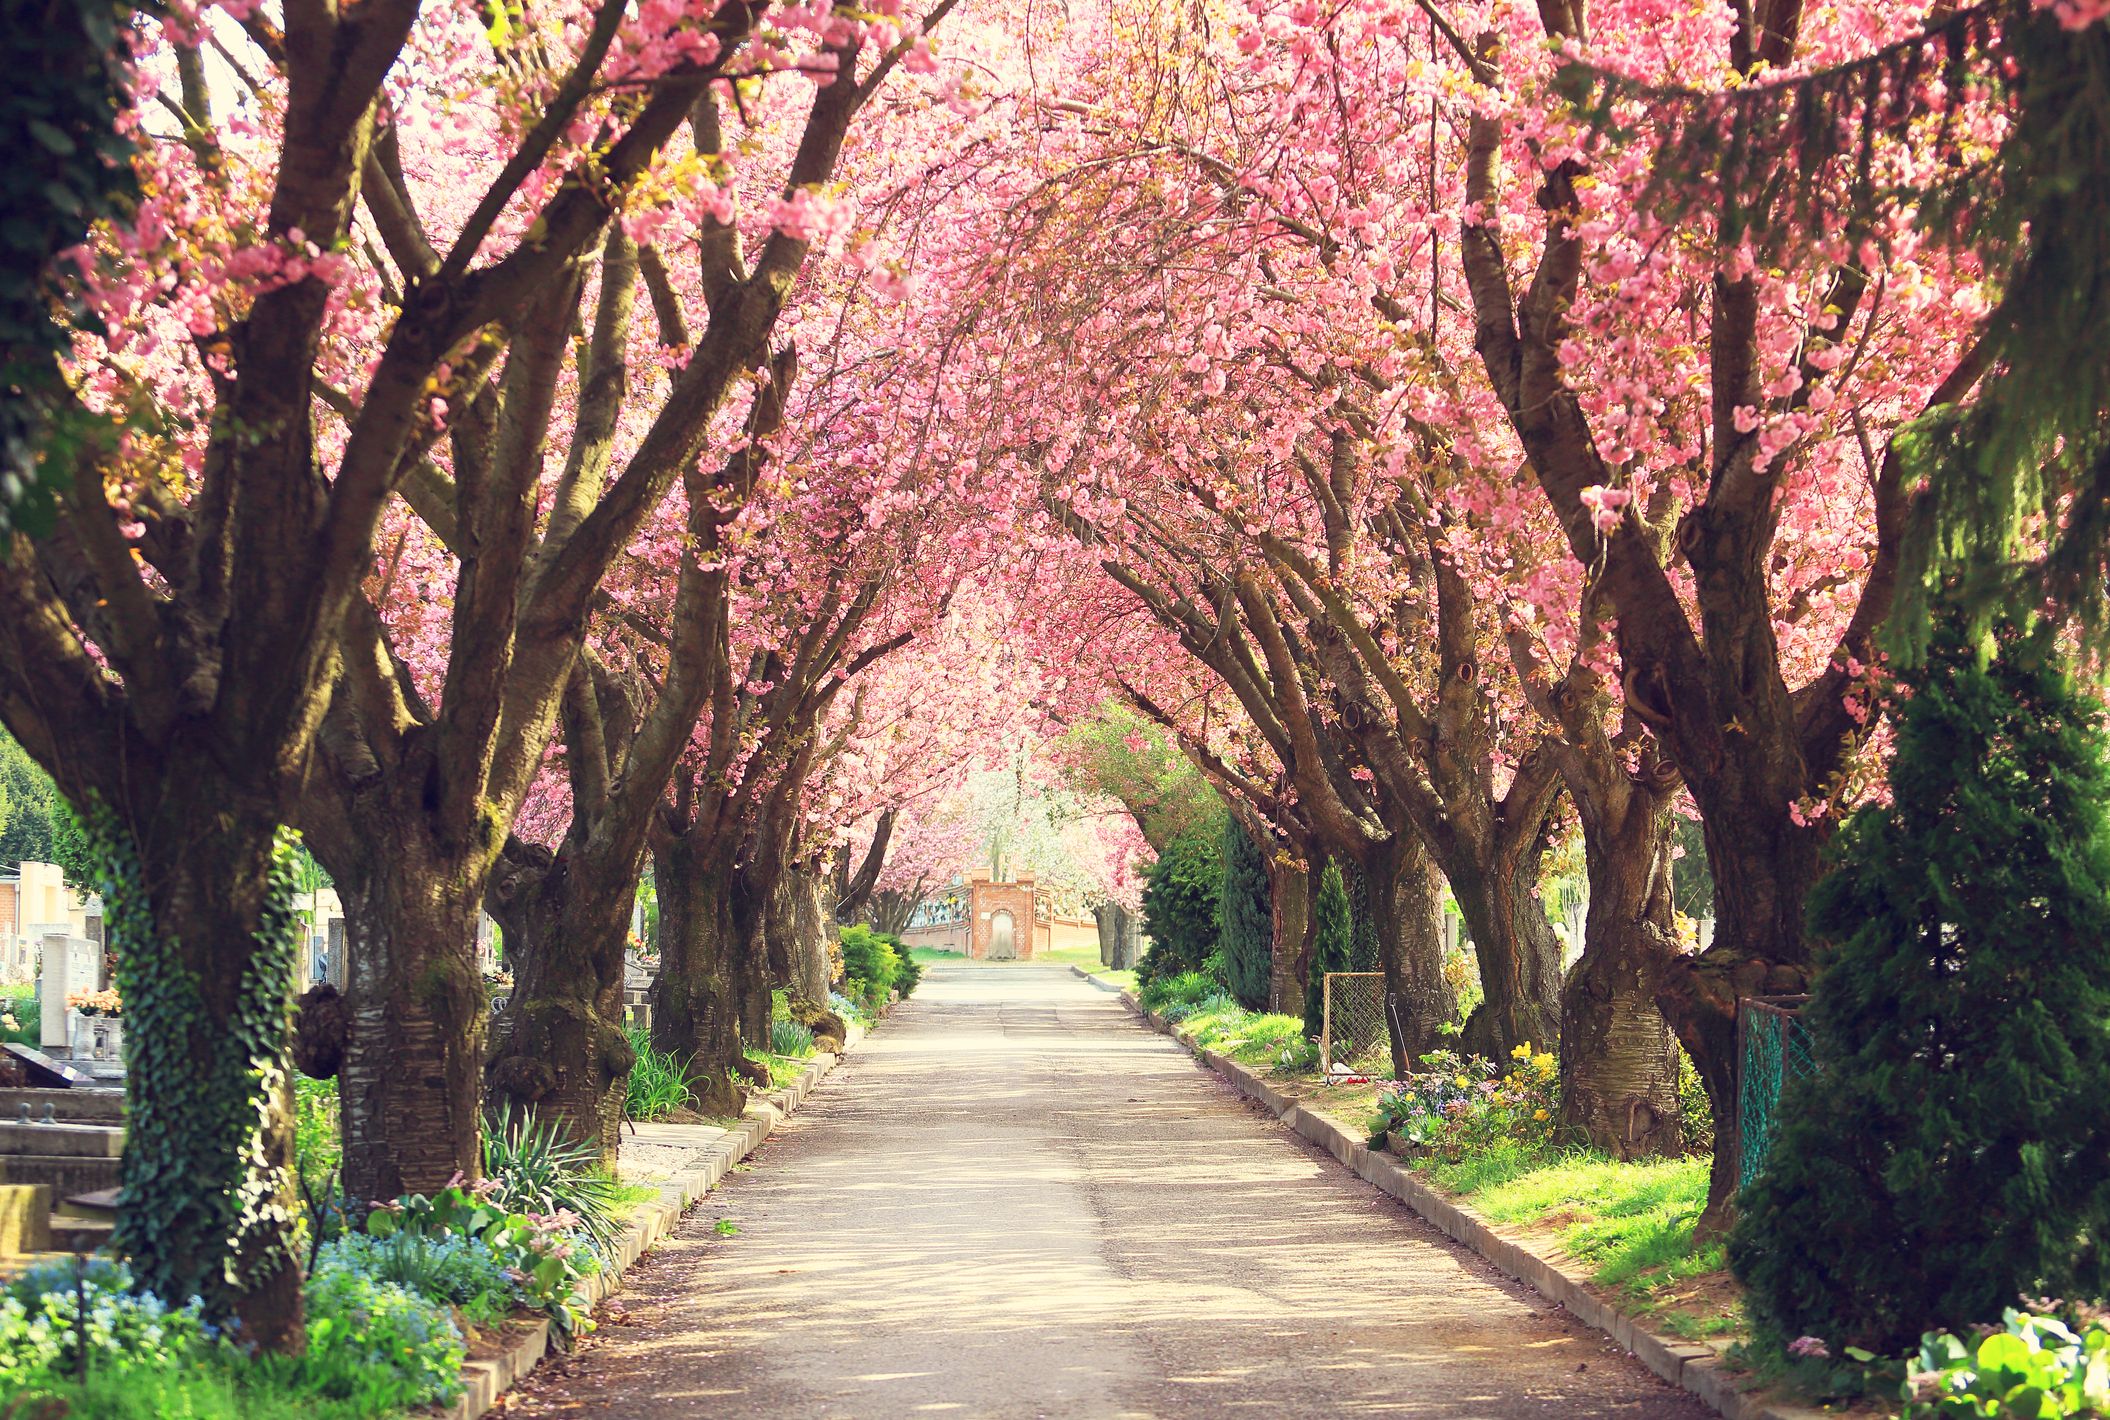 Cherry Blossom Facts - 9 Things to Know About Cherry Blossom Trees